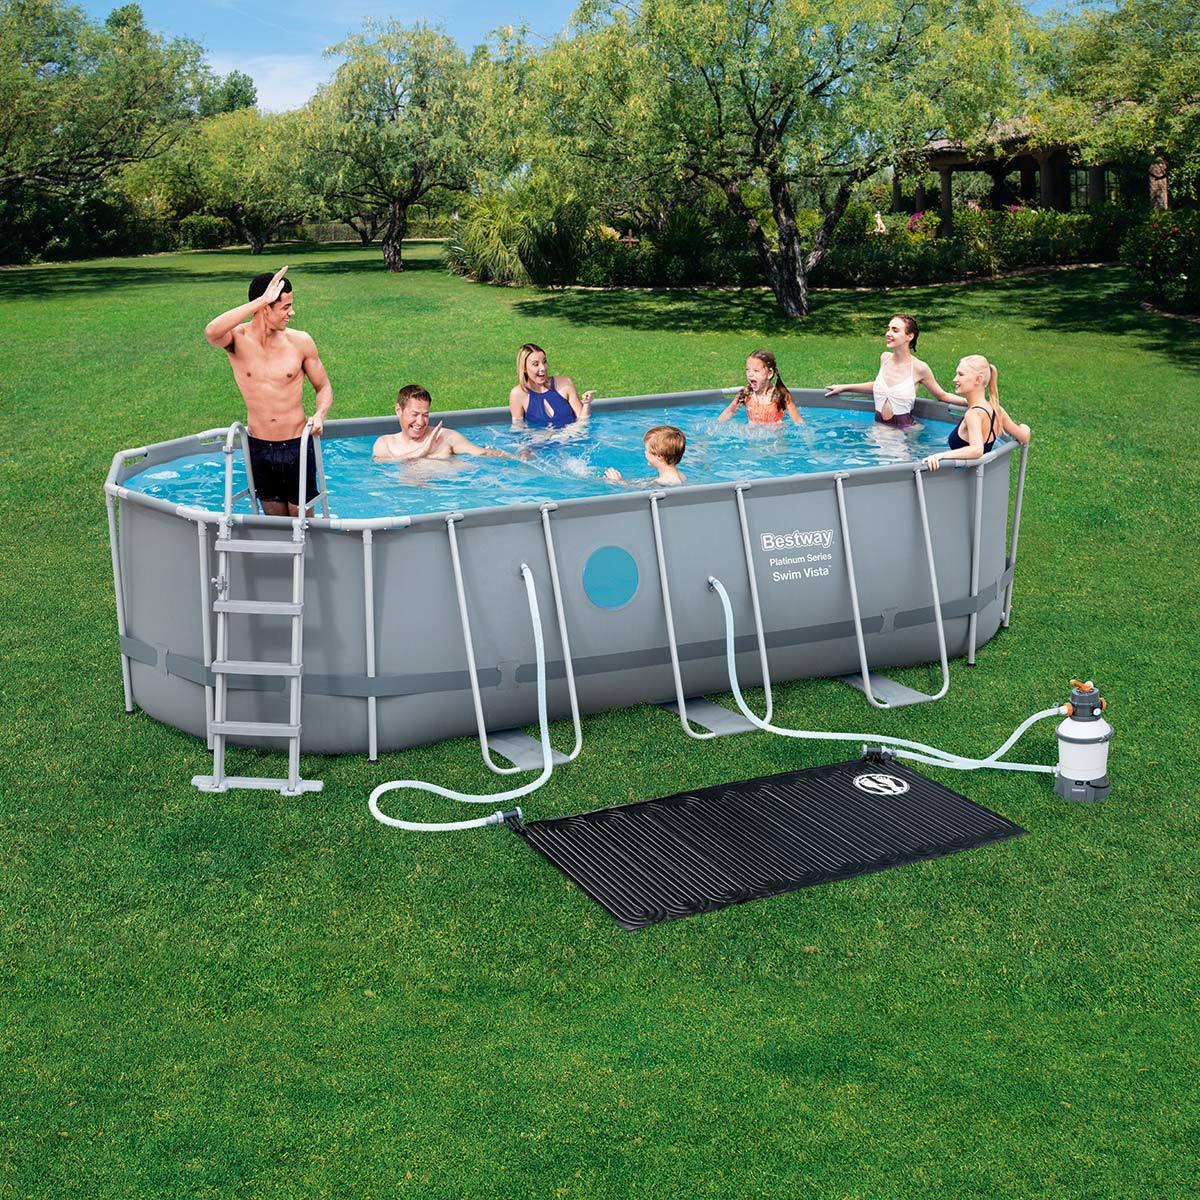 Bestway 18 x 9 ft Steel Oval Frame Pool with Sand Filter Pump, Solar Powered Pool Pad and Cover